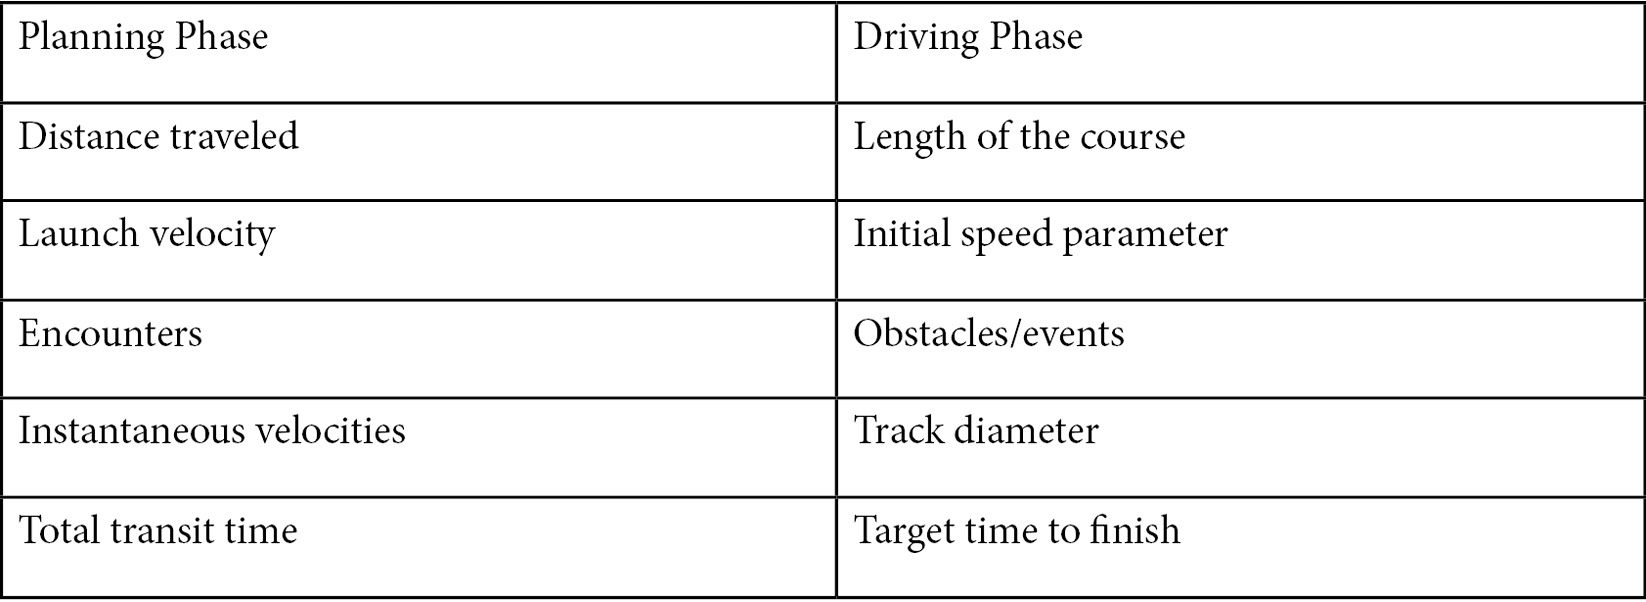 Figure 8.2 – Comparison of Route Planning versus driving phase variables. Source: https://github.com/jelster/space-truckers/issues/84